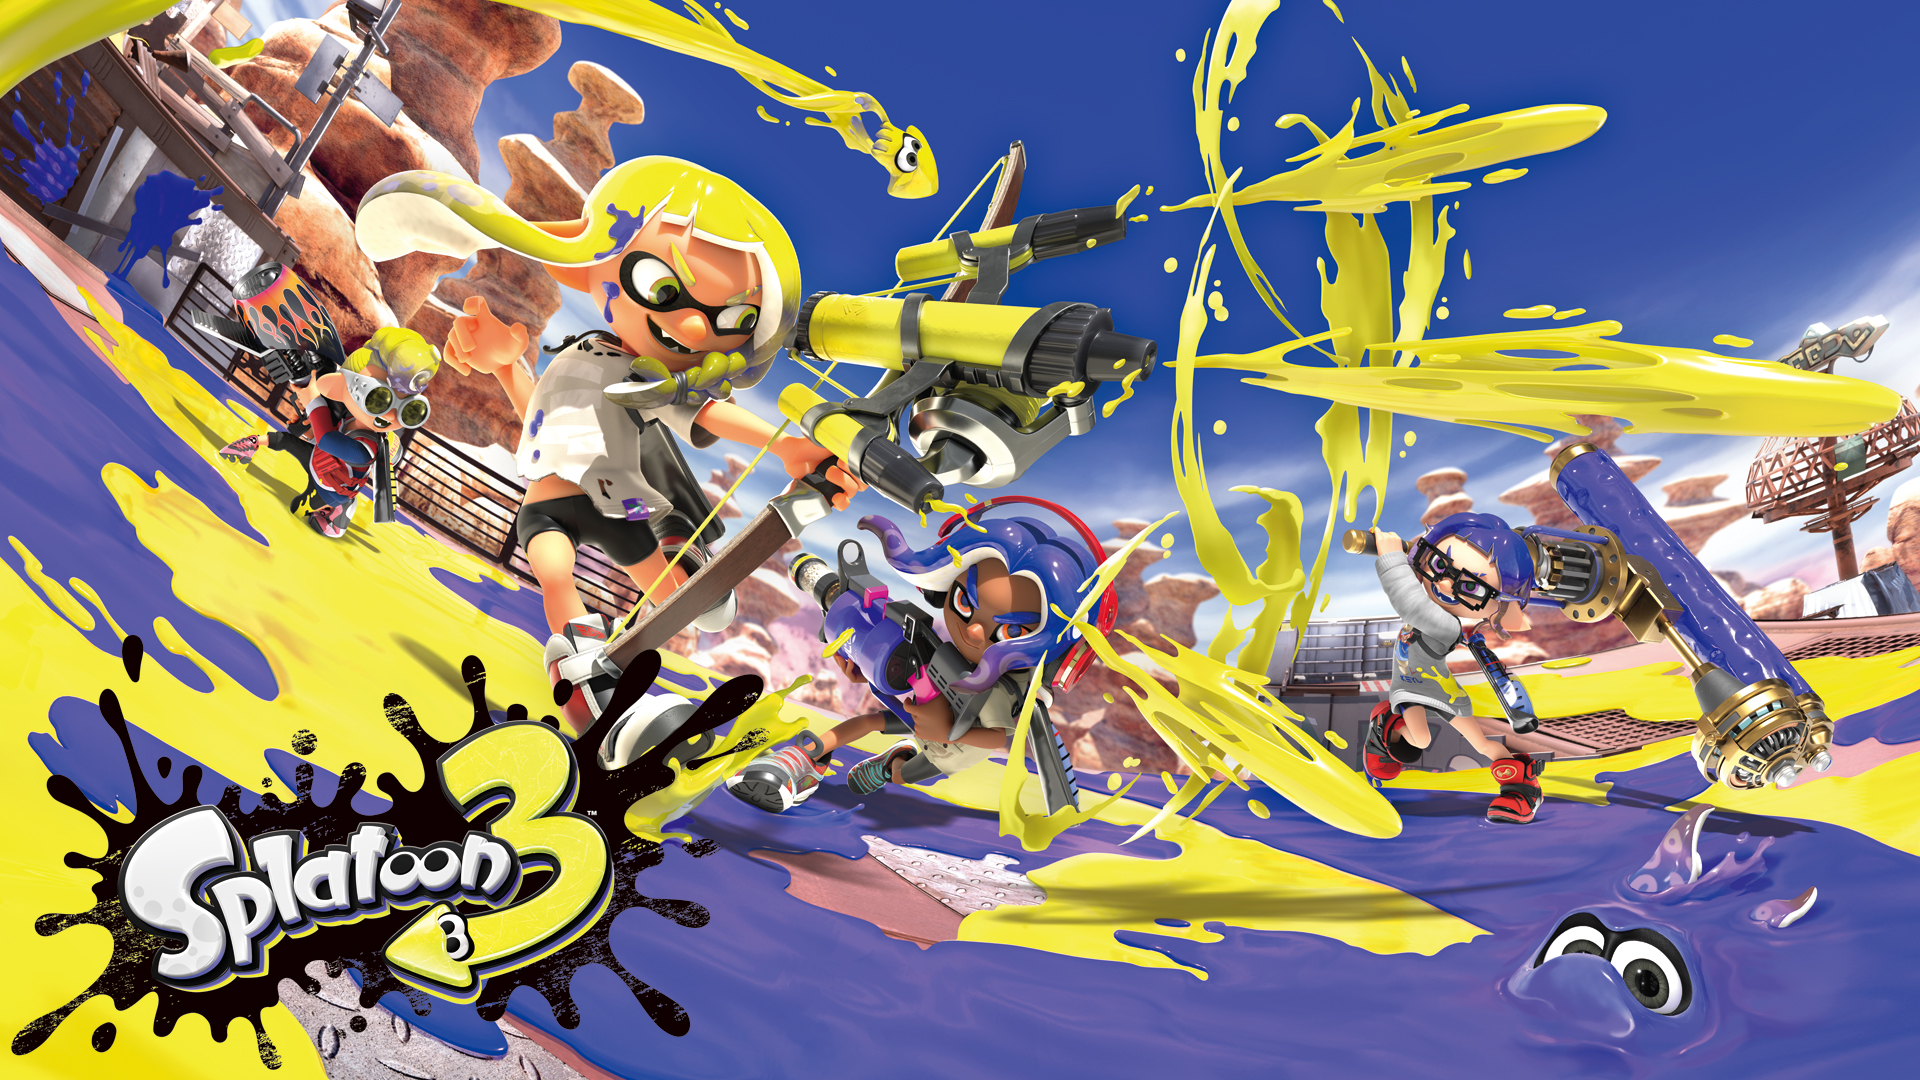 Ready, Set, Ink: Splatoon 3 out now on Switch